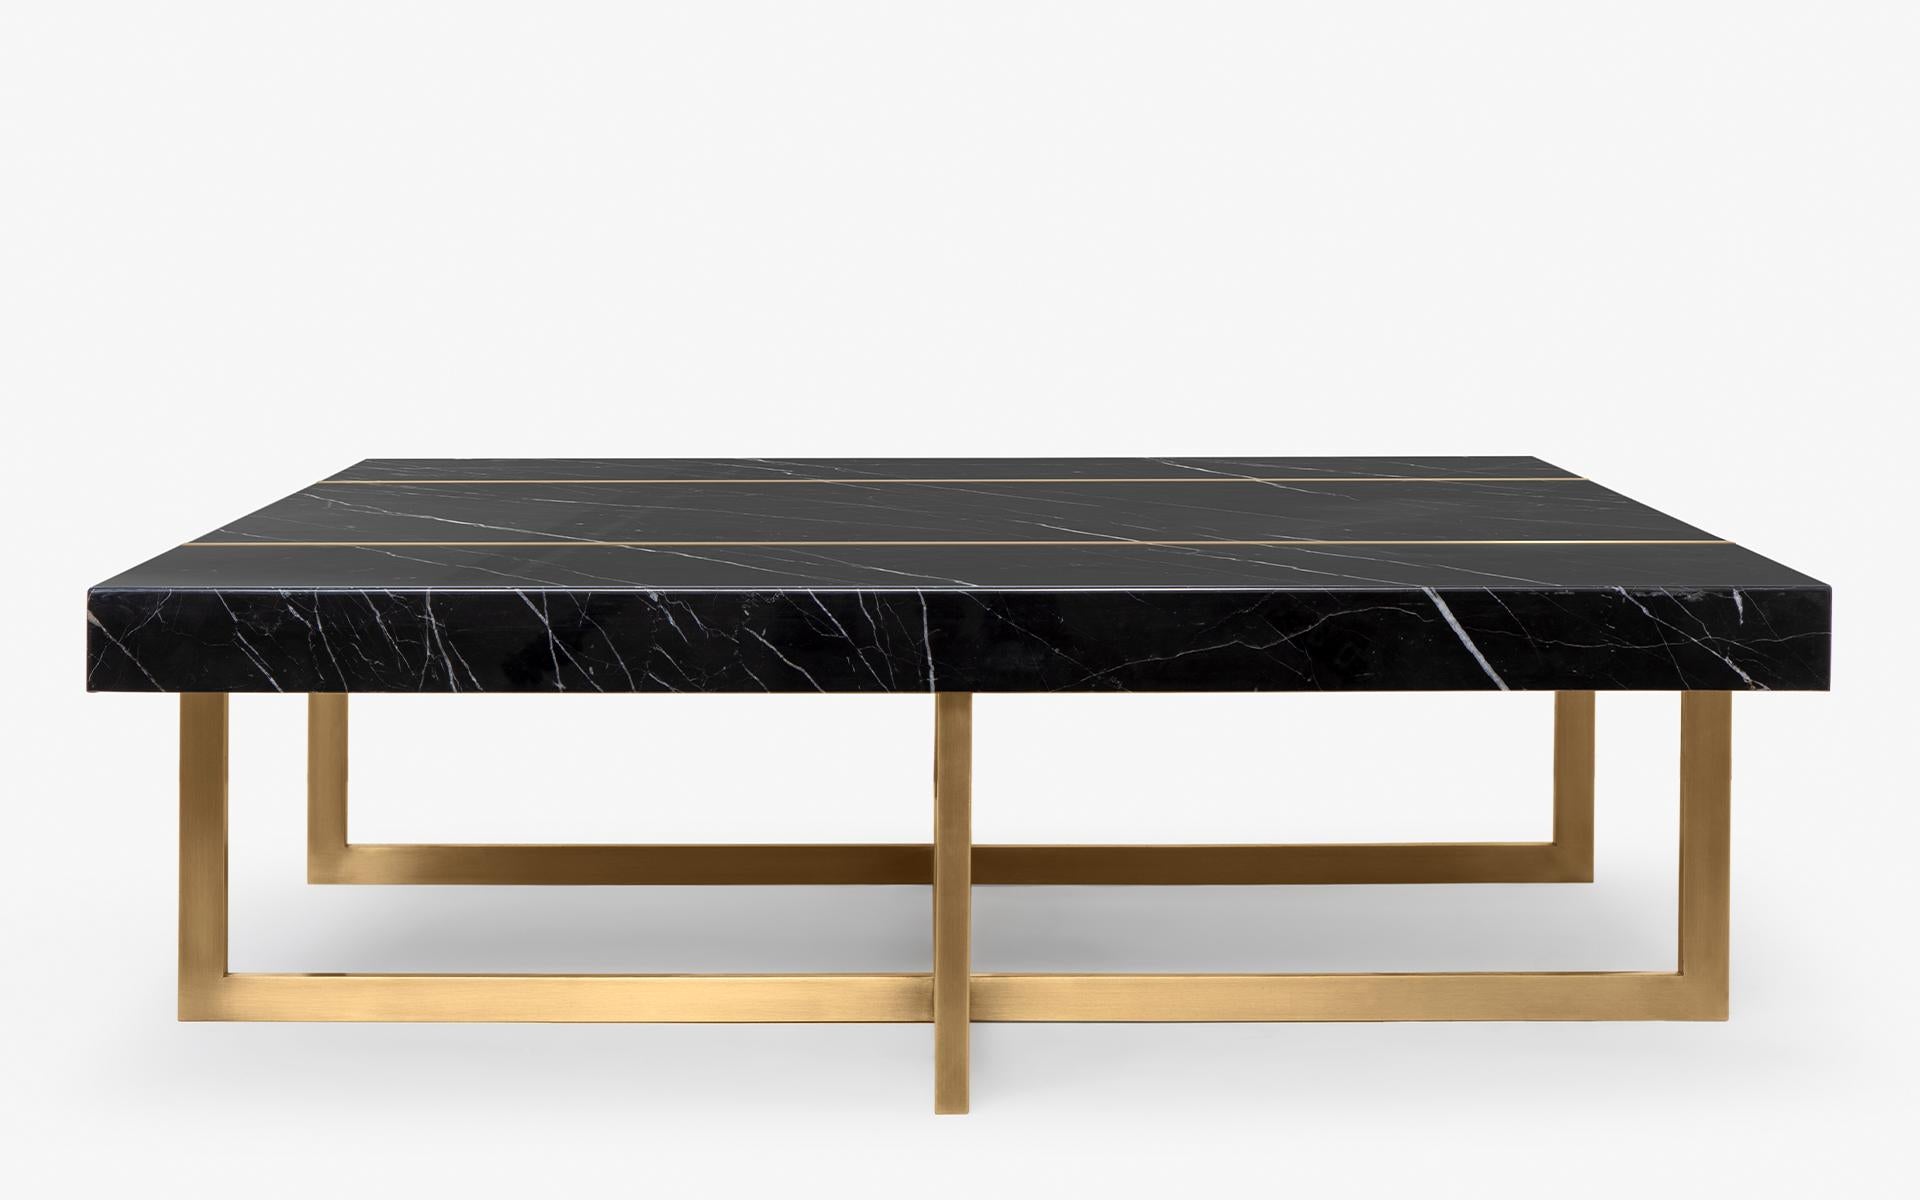 Famed coffee table, glorified by elegant brass legs, prove that every place can wink at its style with its natural marble and wood options. The designs that instantly add modernity to the ambiance of the space are the kind that will easily accompany